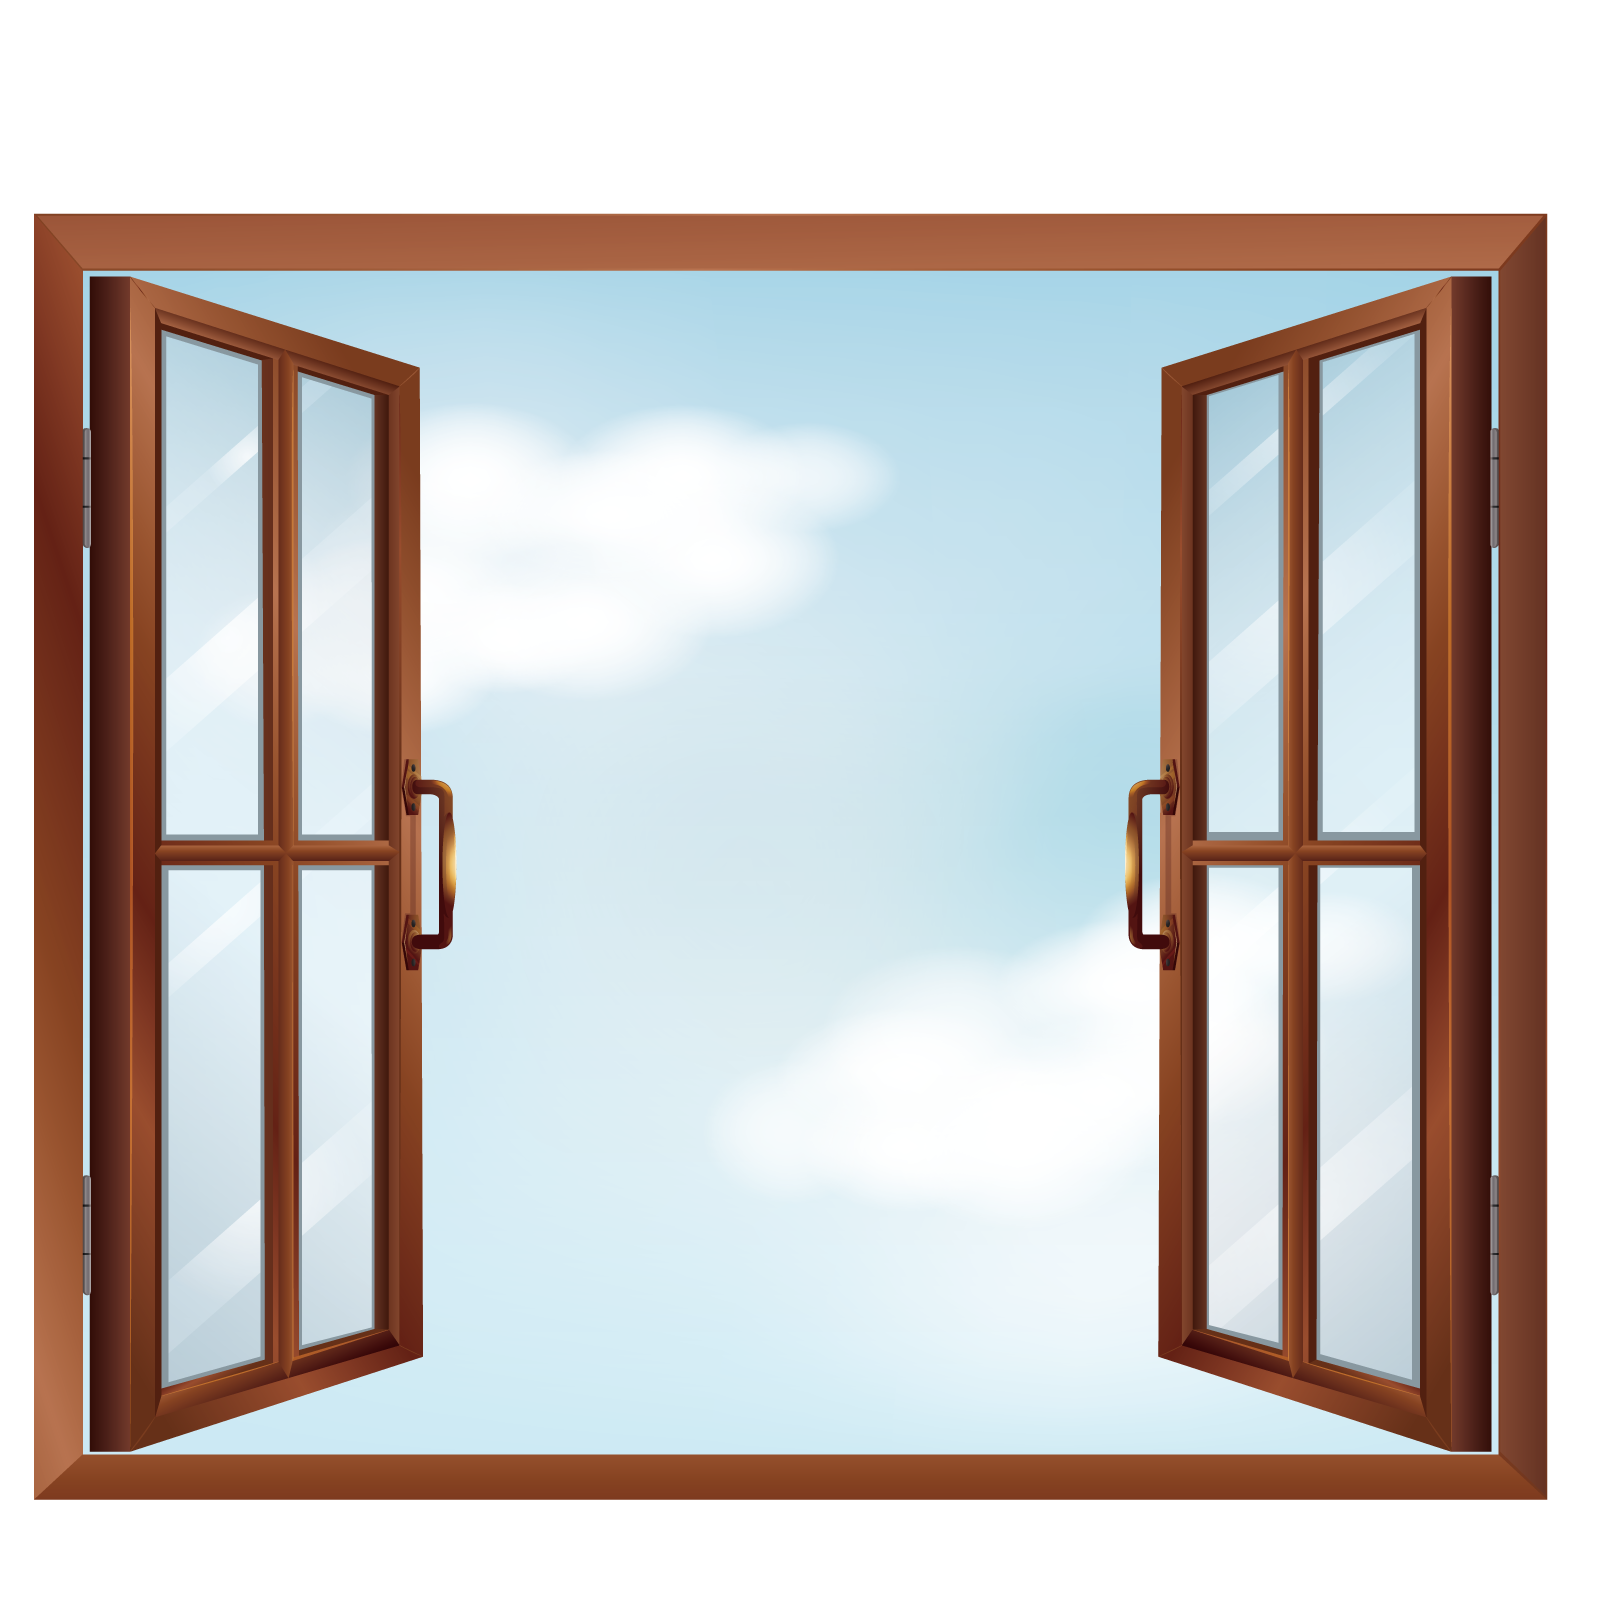 Windows Window Vector Open HQ Image Free PNG Clipart